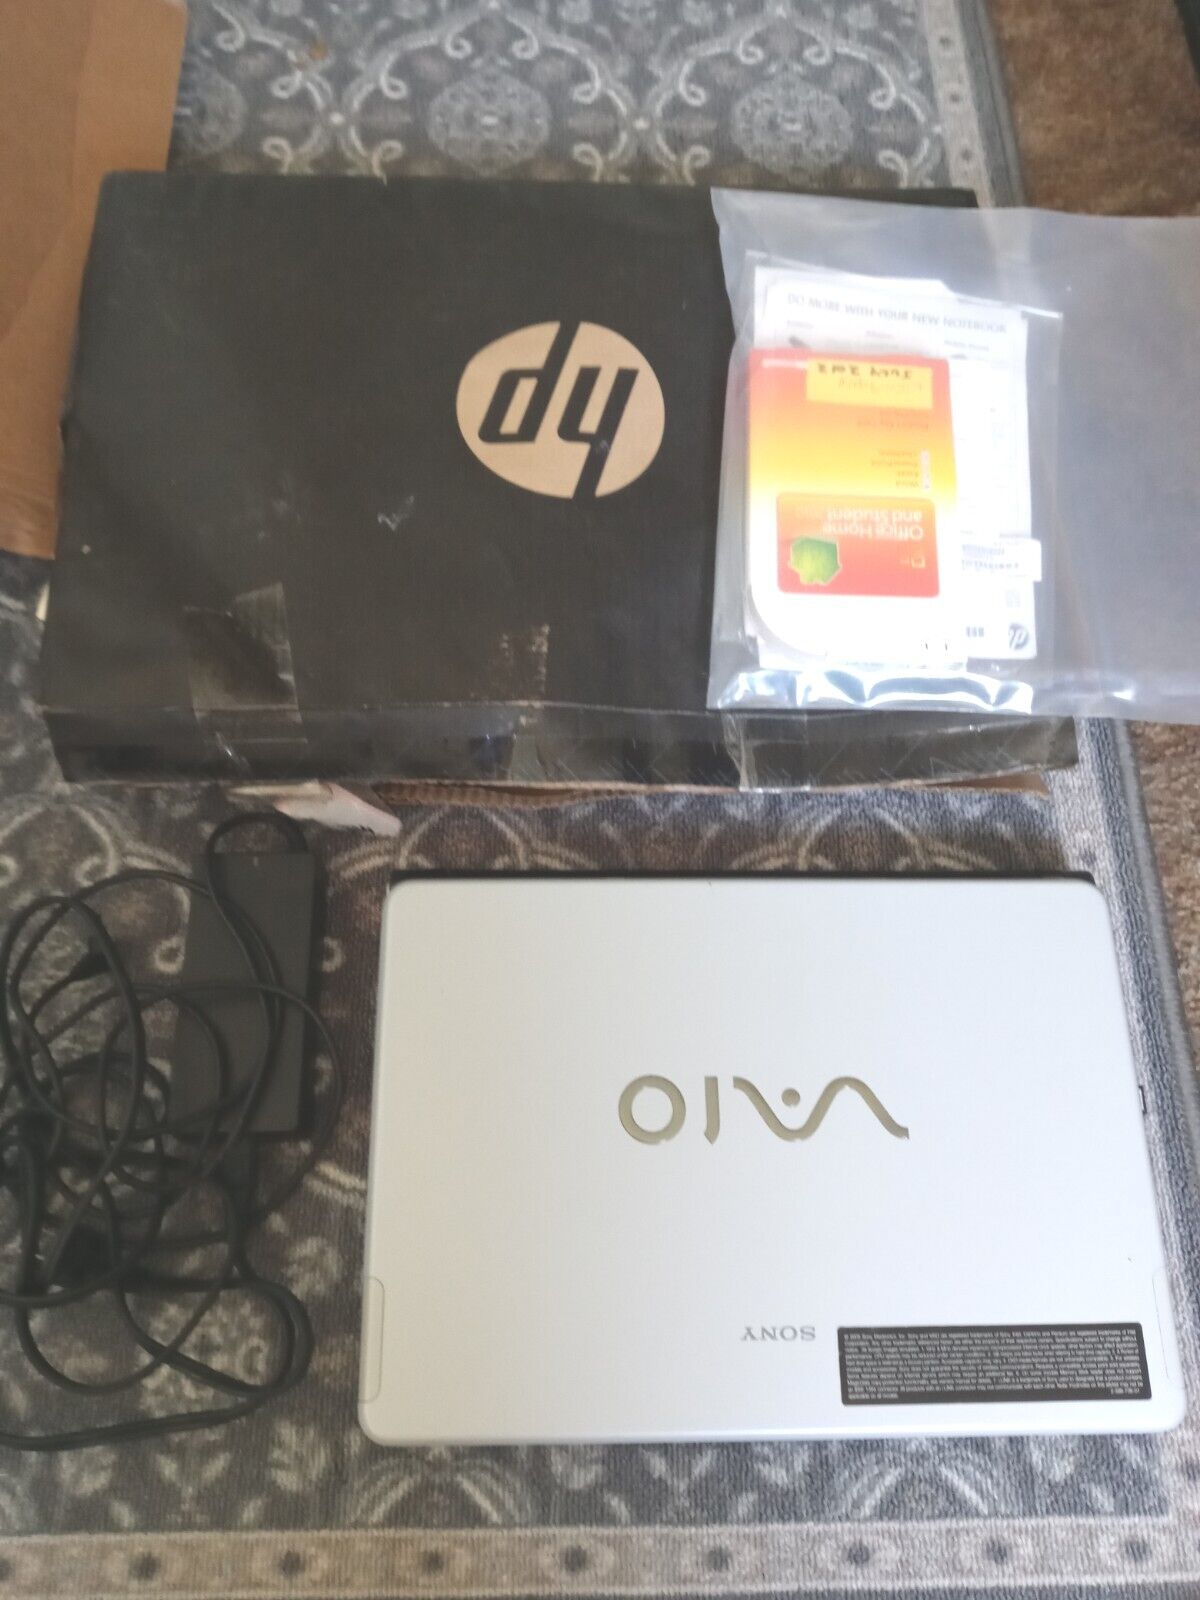 Sony Vaio PCG-7A2L Laptop tested Works With Charger, Box And Receipt